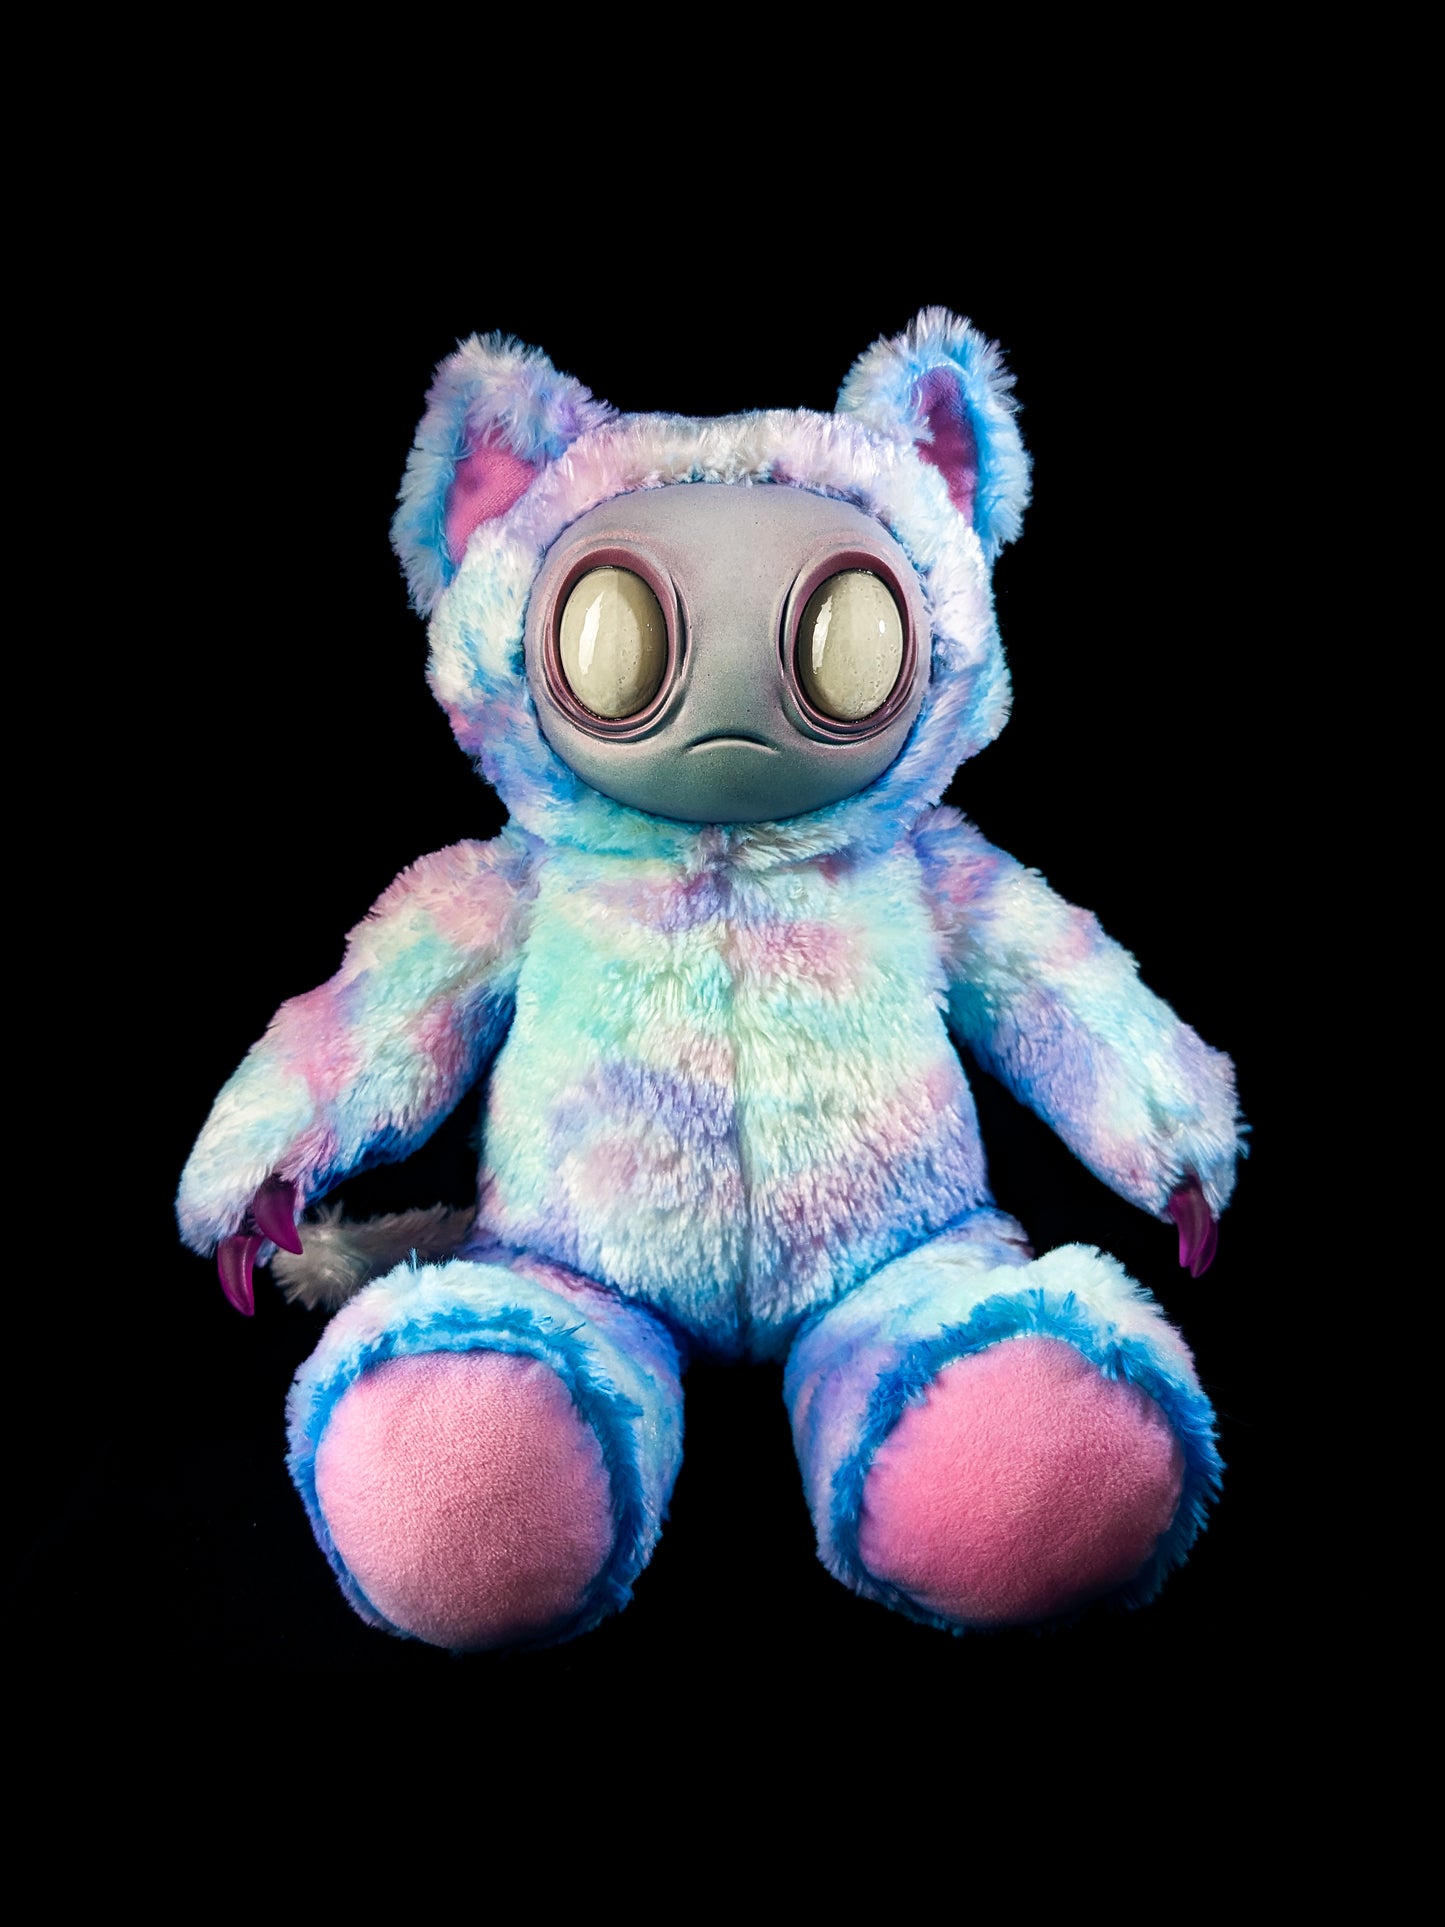 Candy Cat: MEEPORO - CRYPTCRITS Handmade Mystical Woodland Spirit Art Doll Plush Toy for Enigmatic Wanderers